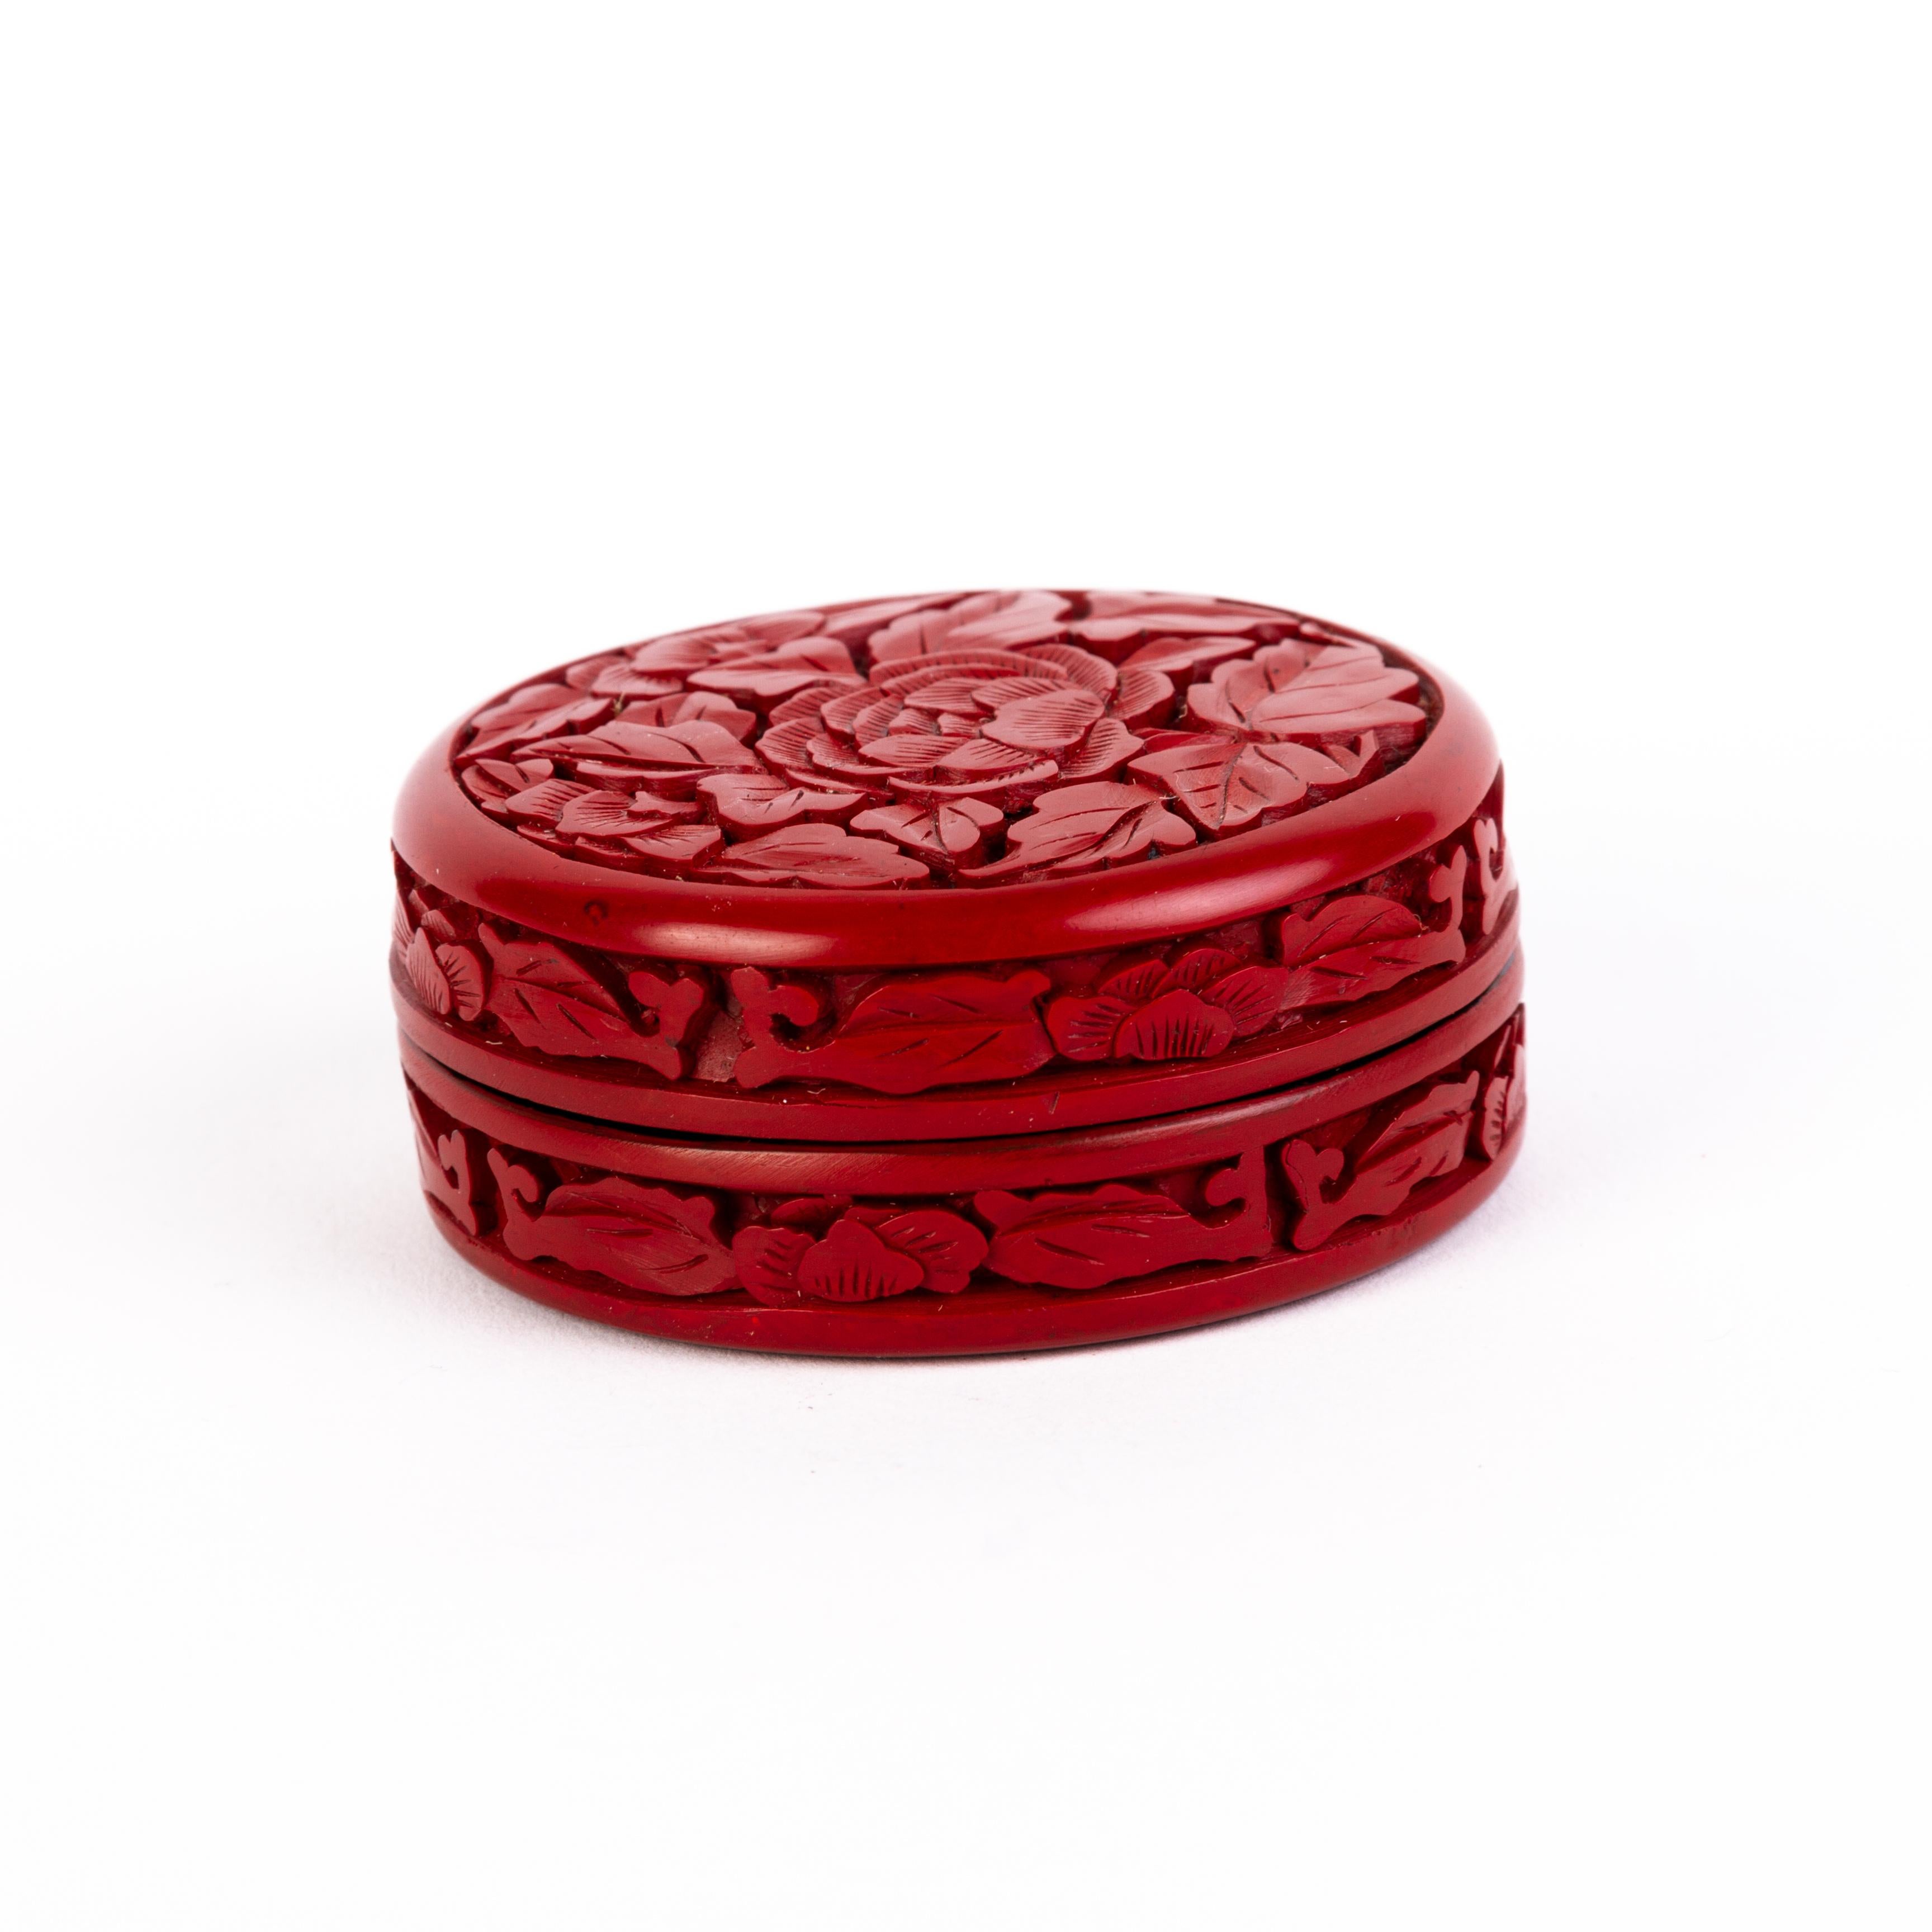 Chinese Qing Dynasty Carved Cinnabar Lacquer Circular Lidded Box circa 1900
Good condition
From a private collection.
Free international shipping.